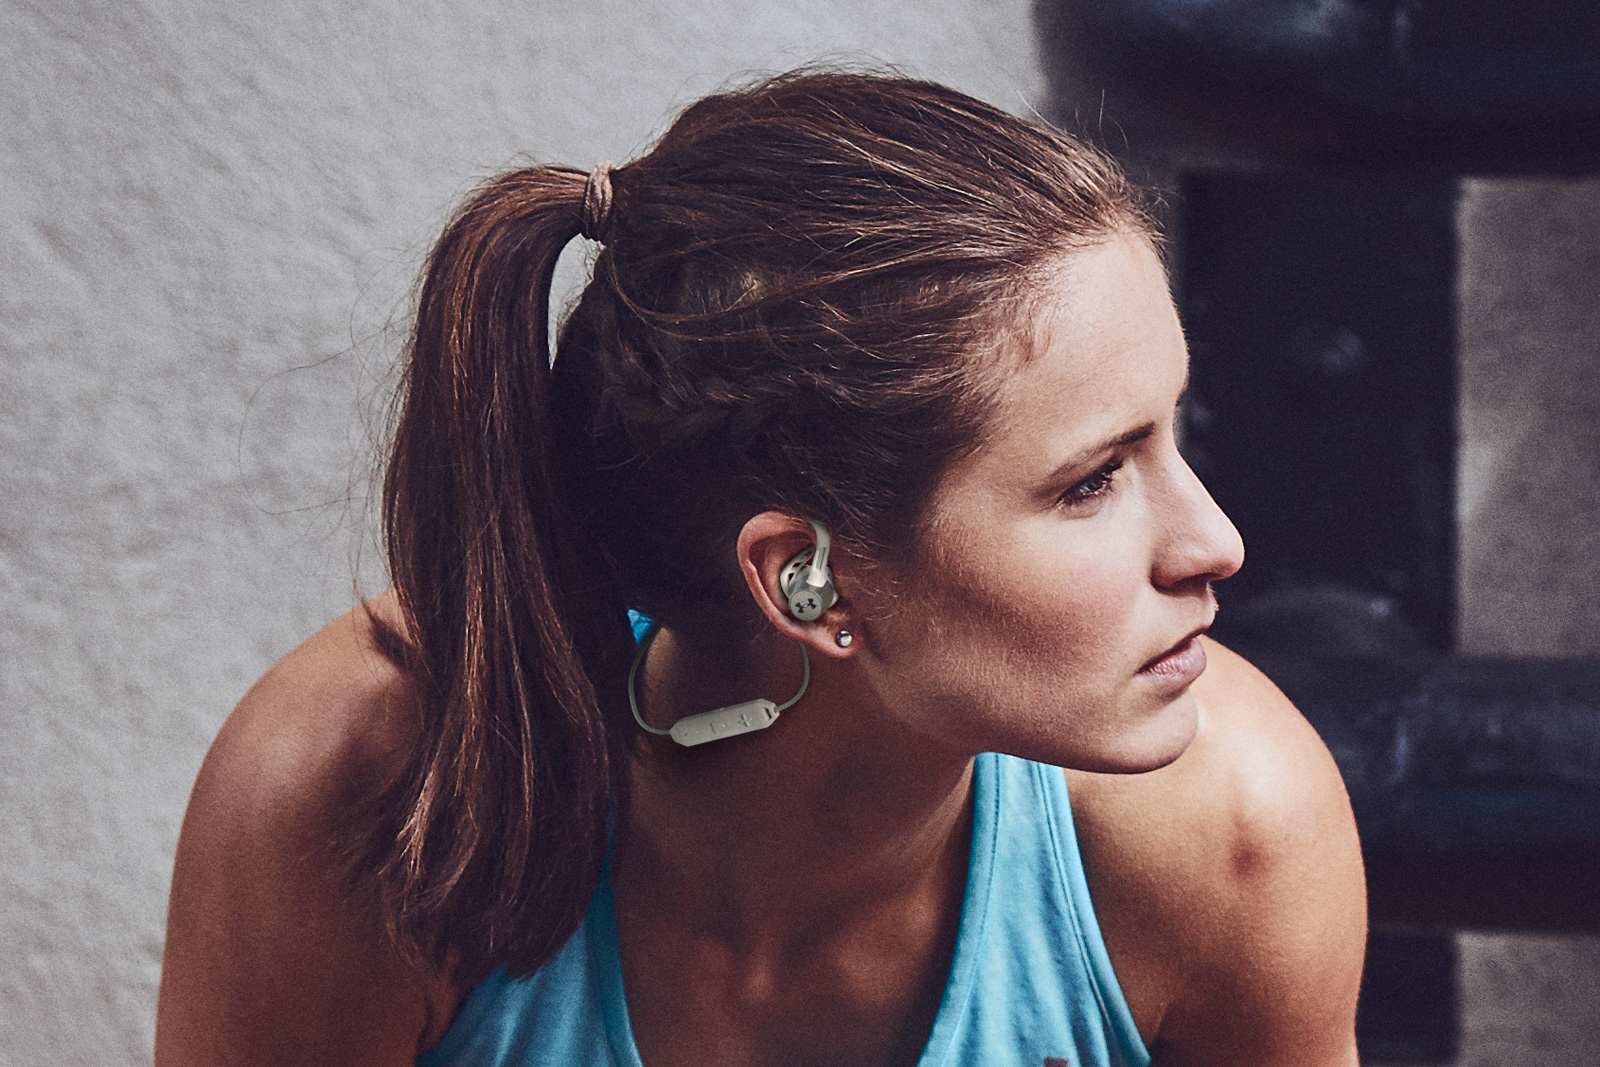 buds stay in your ears during workouts 